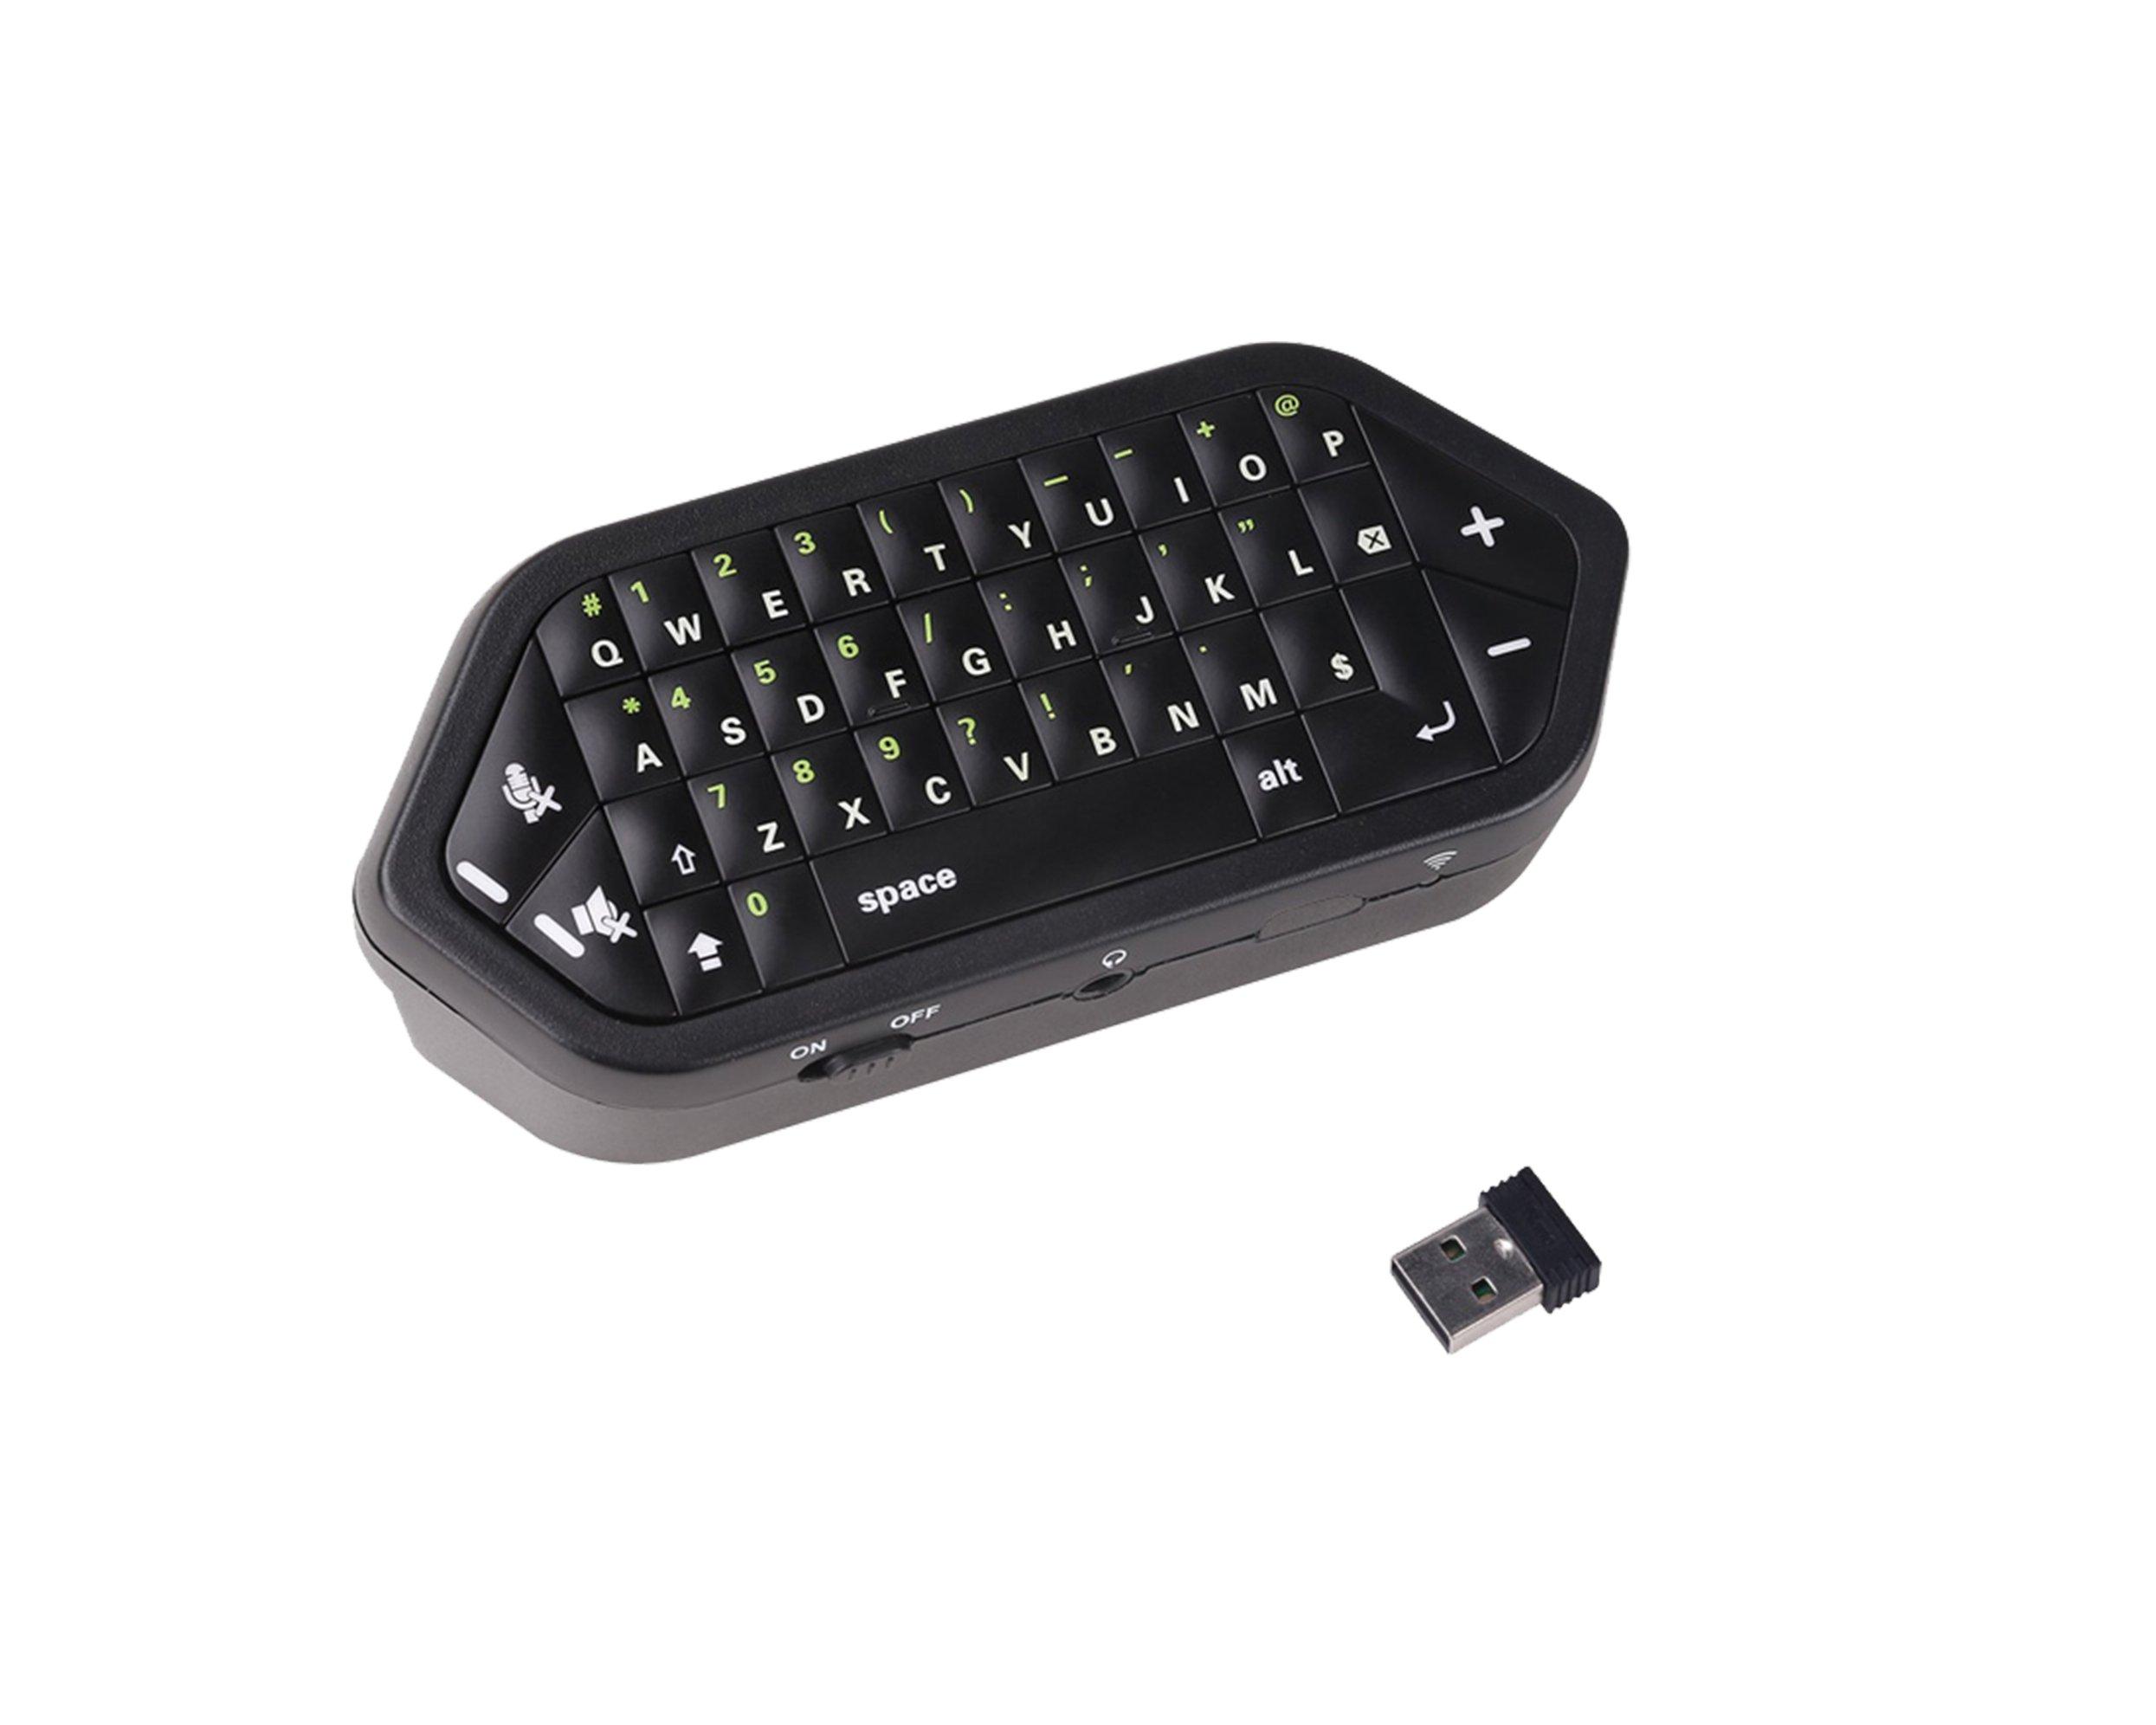 xbox one controller keyboard attachment